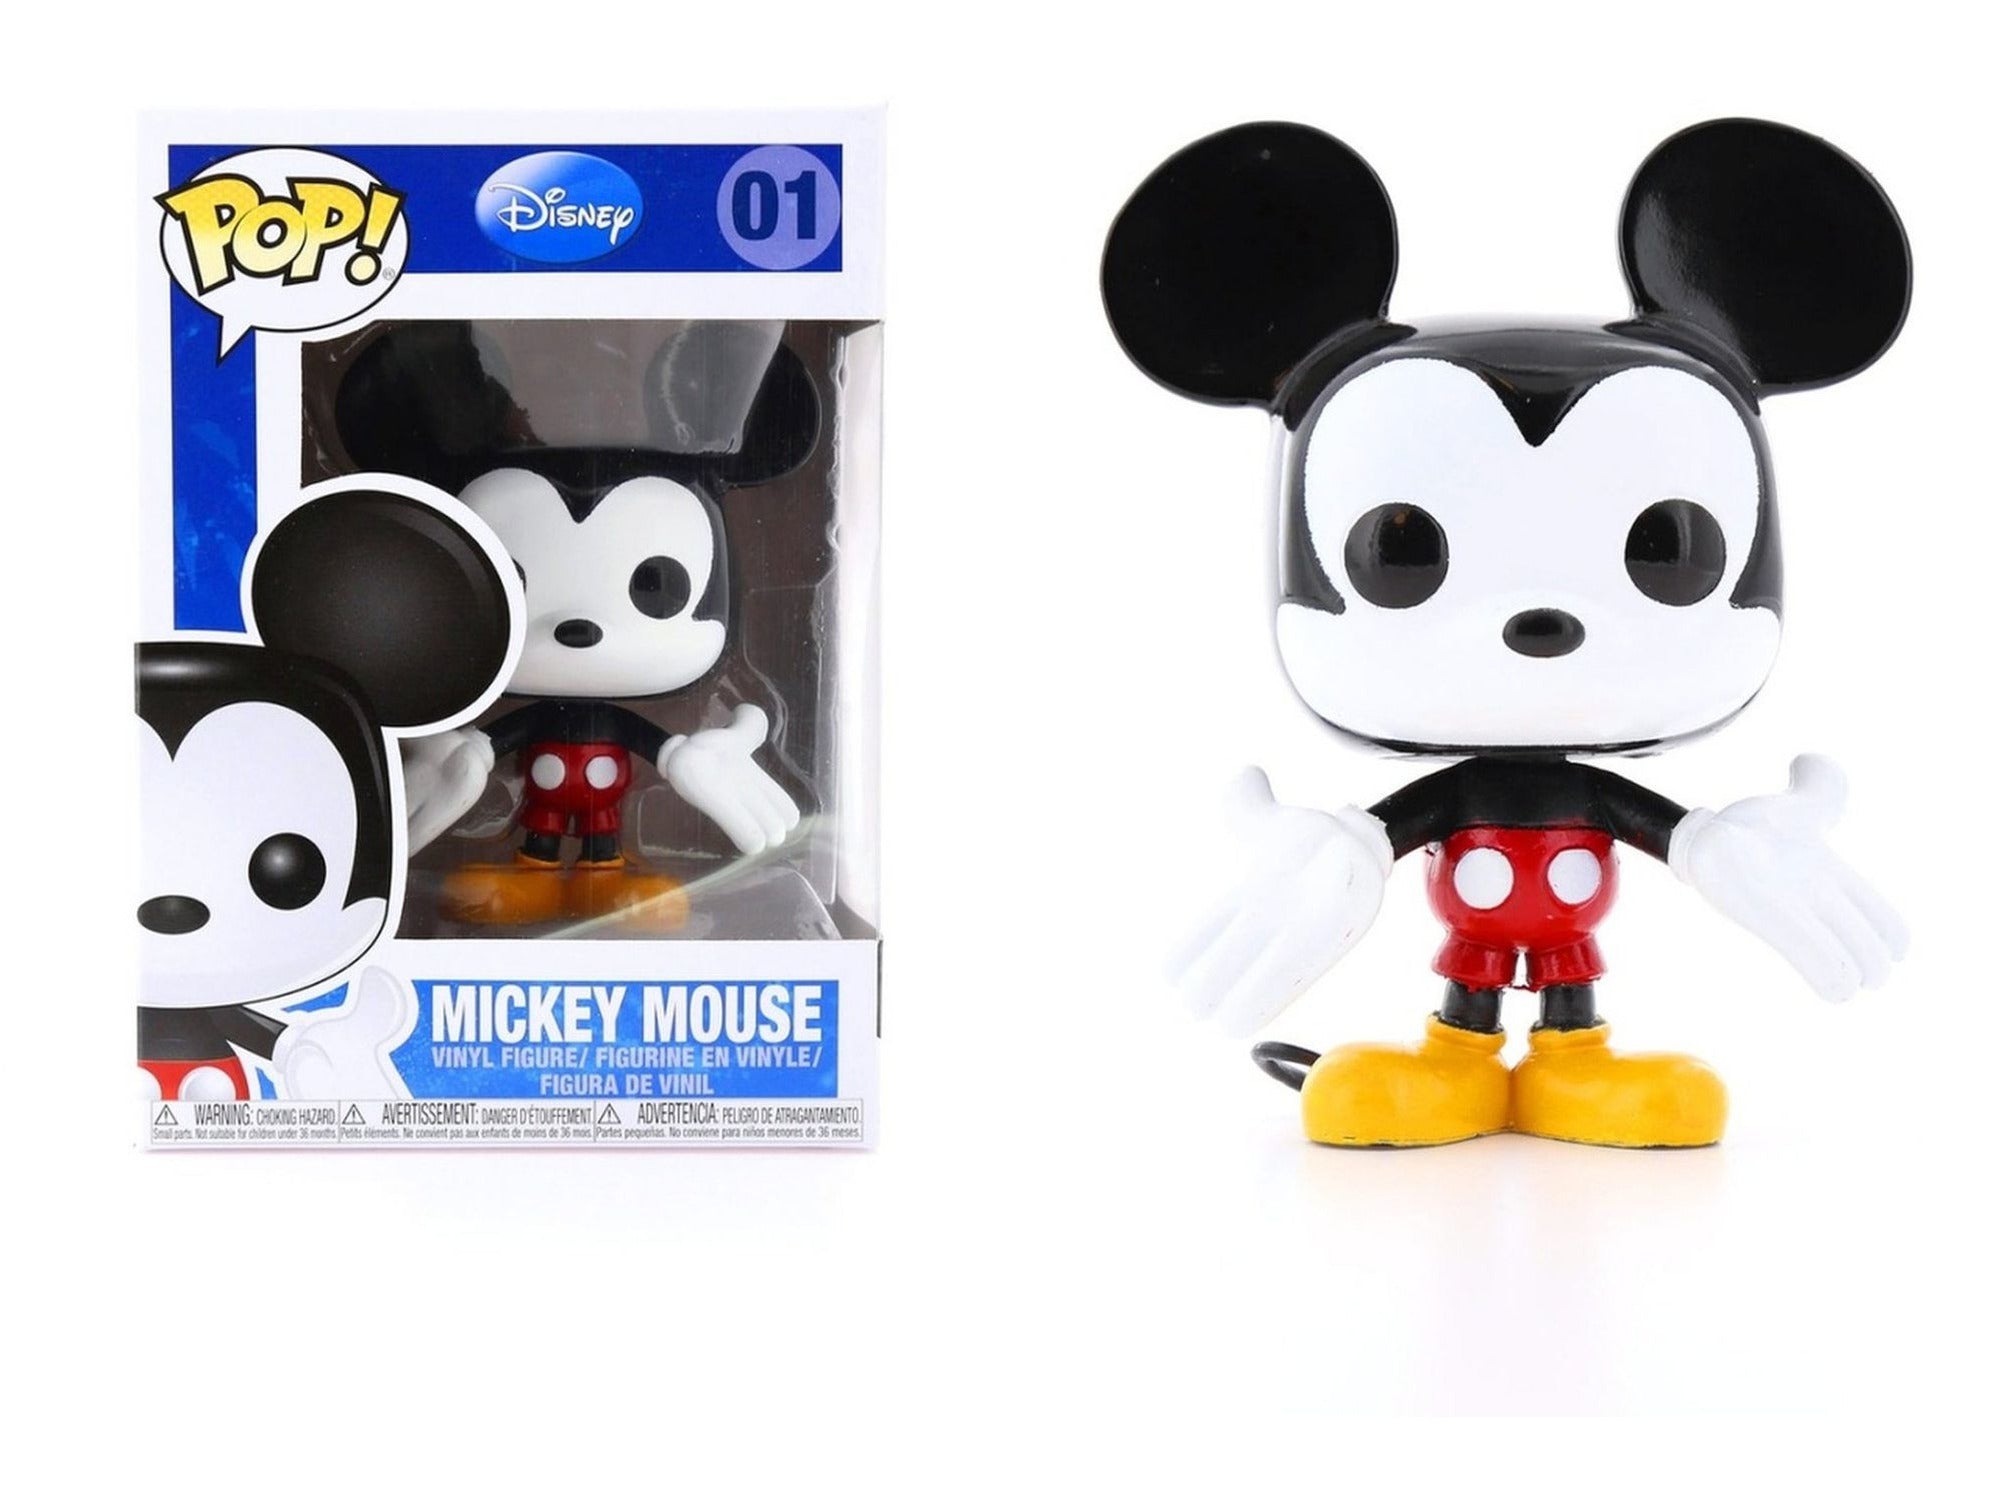 Pop Disney Mickey Mouse 3.75 Inch Action Figure - Mickey Mouse